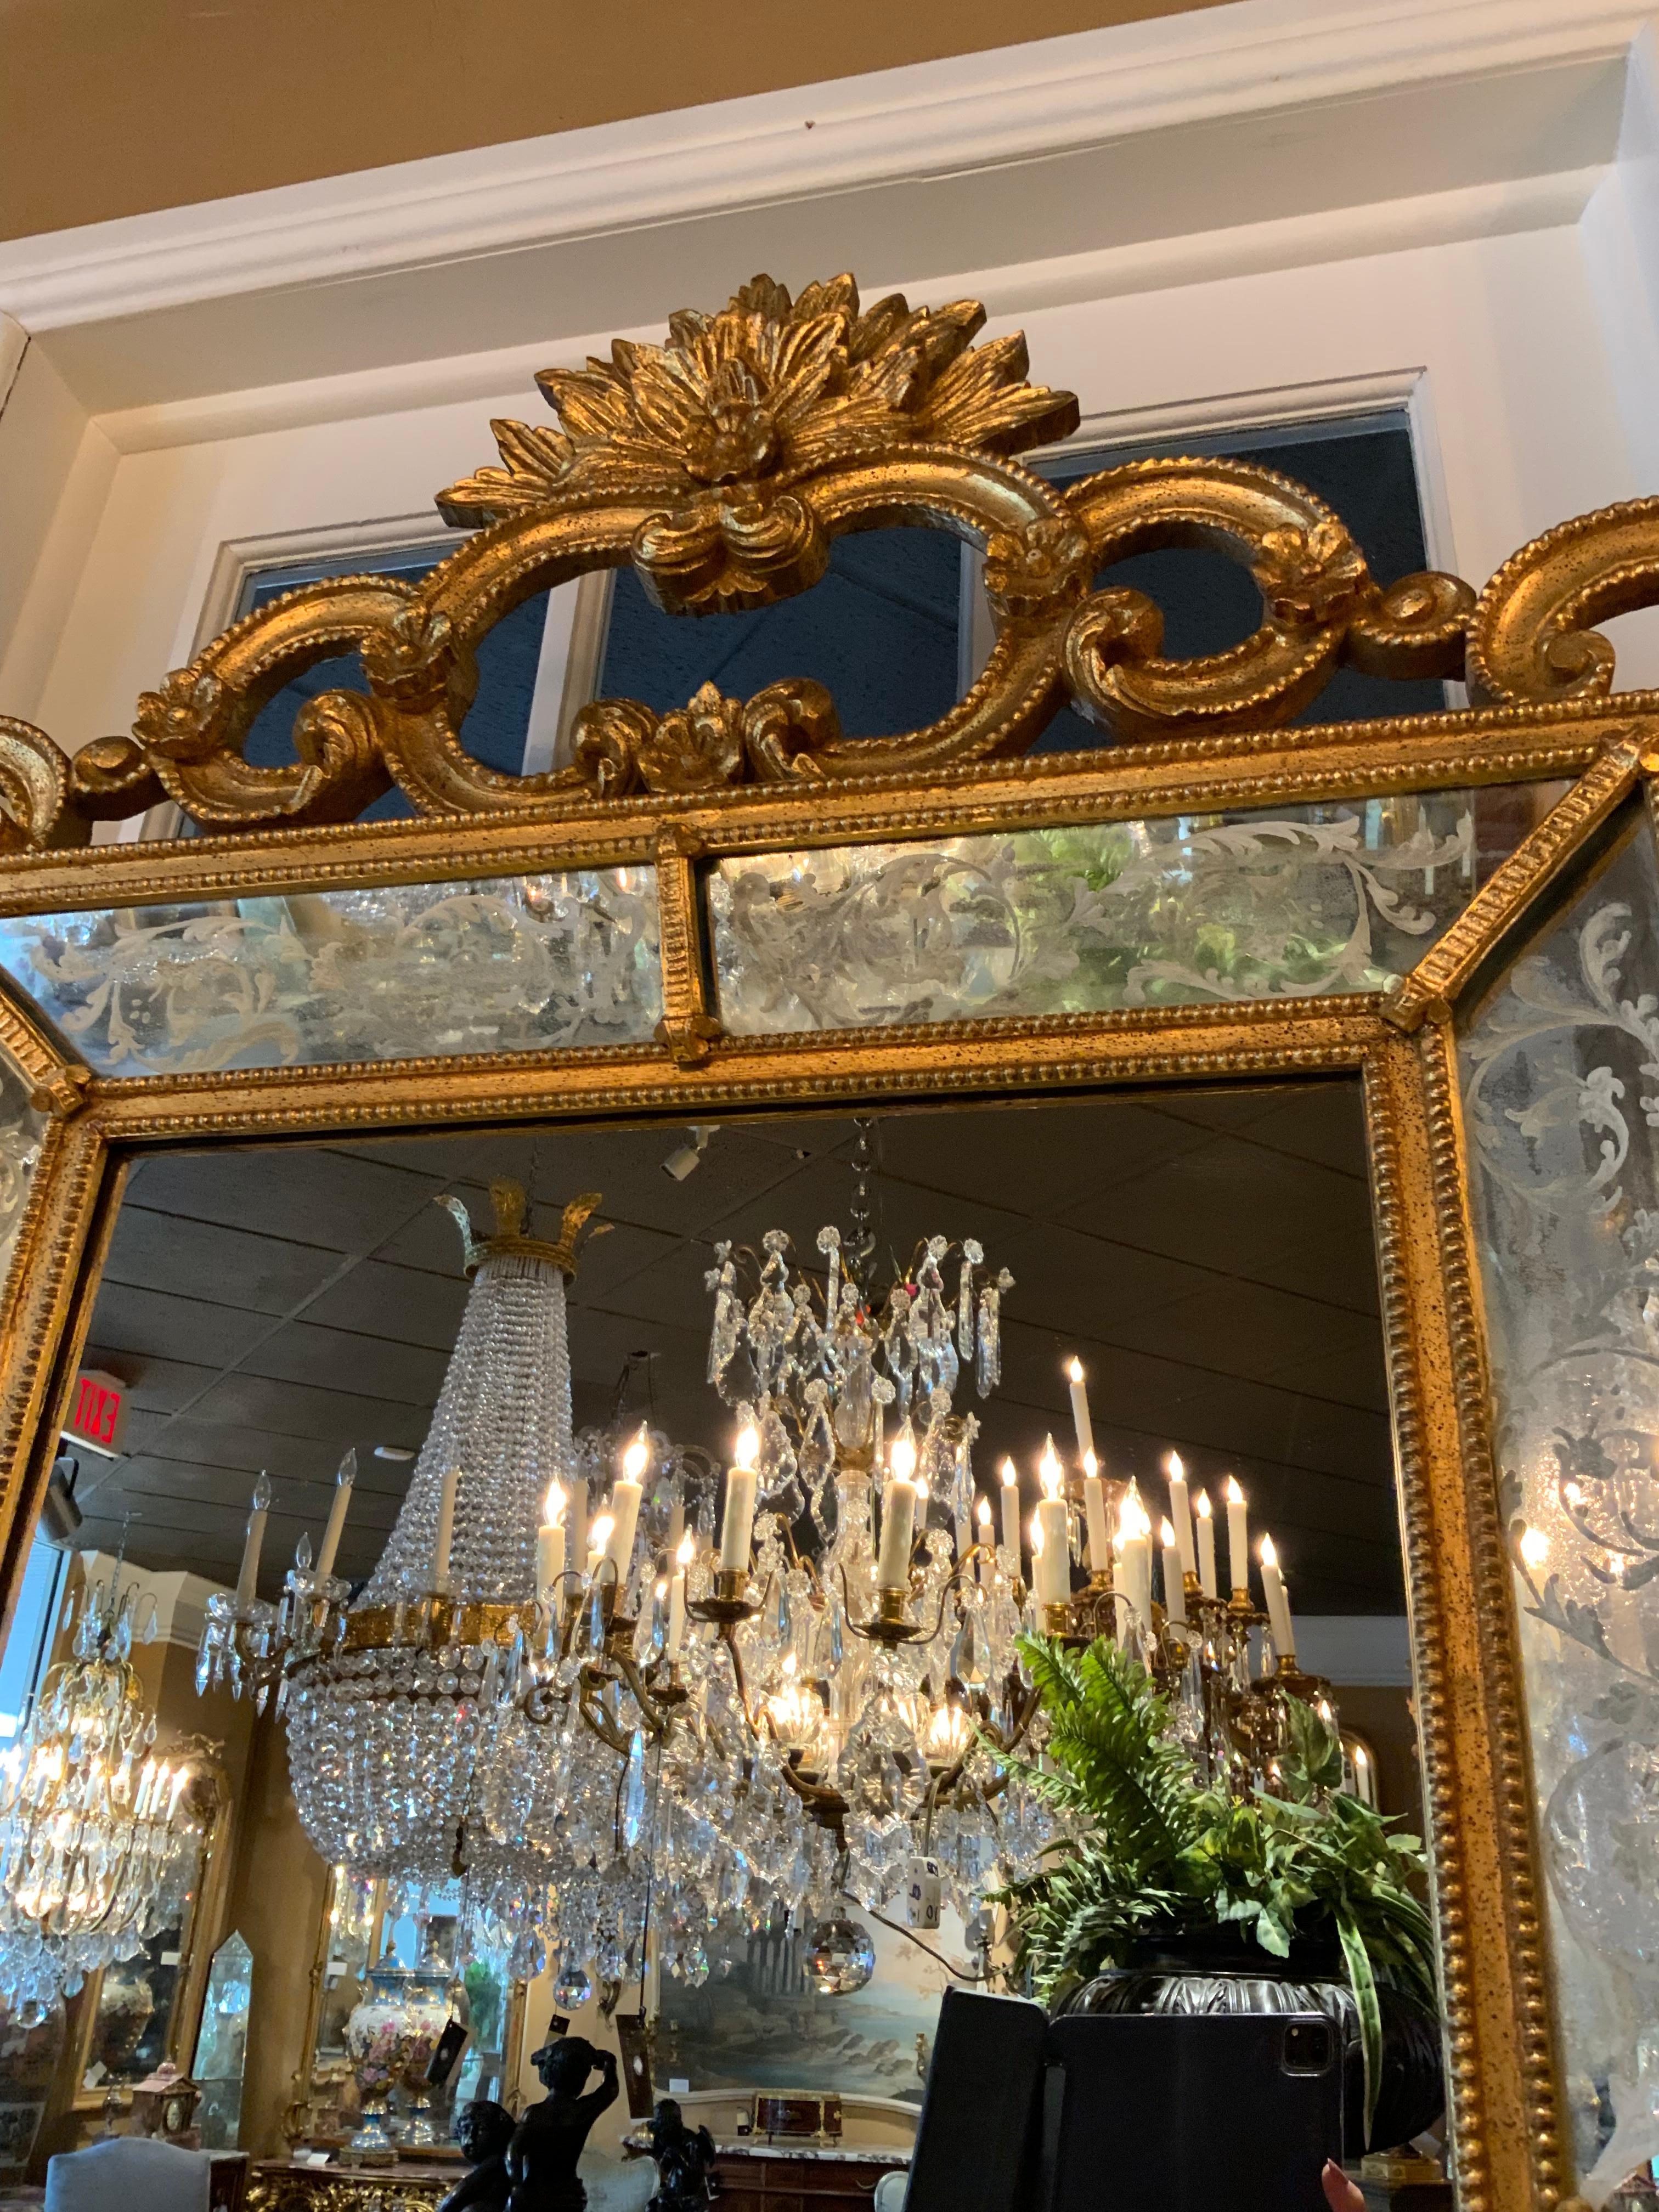 This piece is carved in the Venetian rococo taste with curved and 
Scrolling frames with foliate detail. It has double framing with inset
Mirror that has hand etching which has delicate aging. The top
Crest has a burst of foliate leaves. The